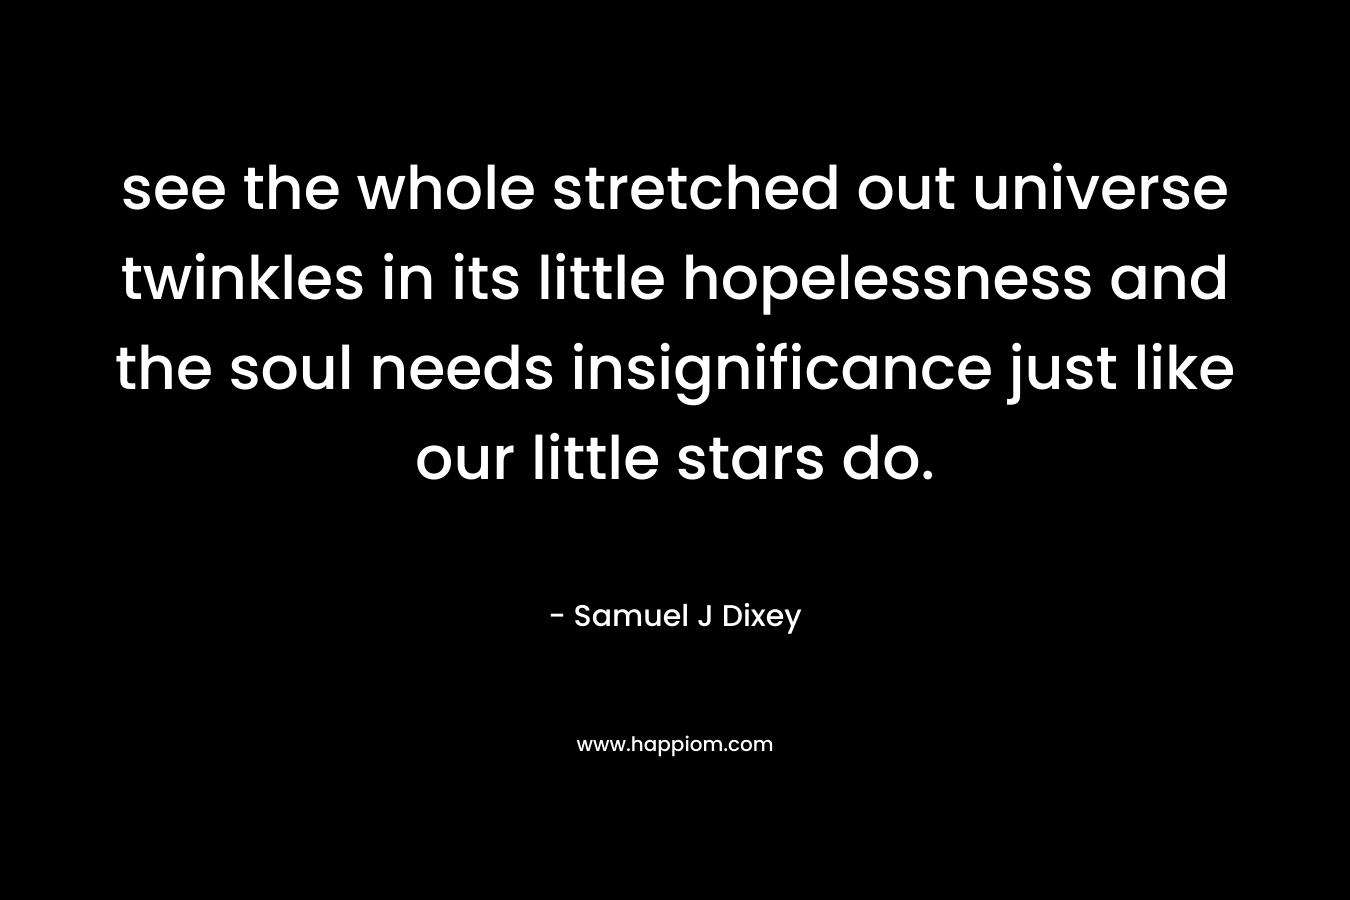 see the whole stretched out universe twinkles in its little hopelessness and the soul needs insignificance just like our little stars do. – Samuel J Dixey